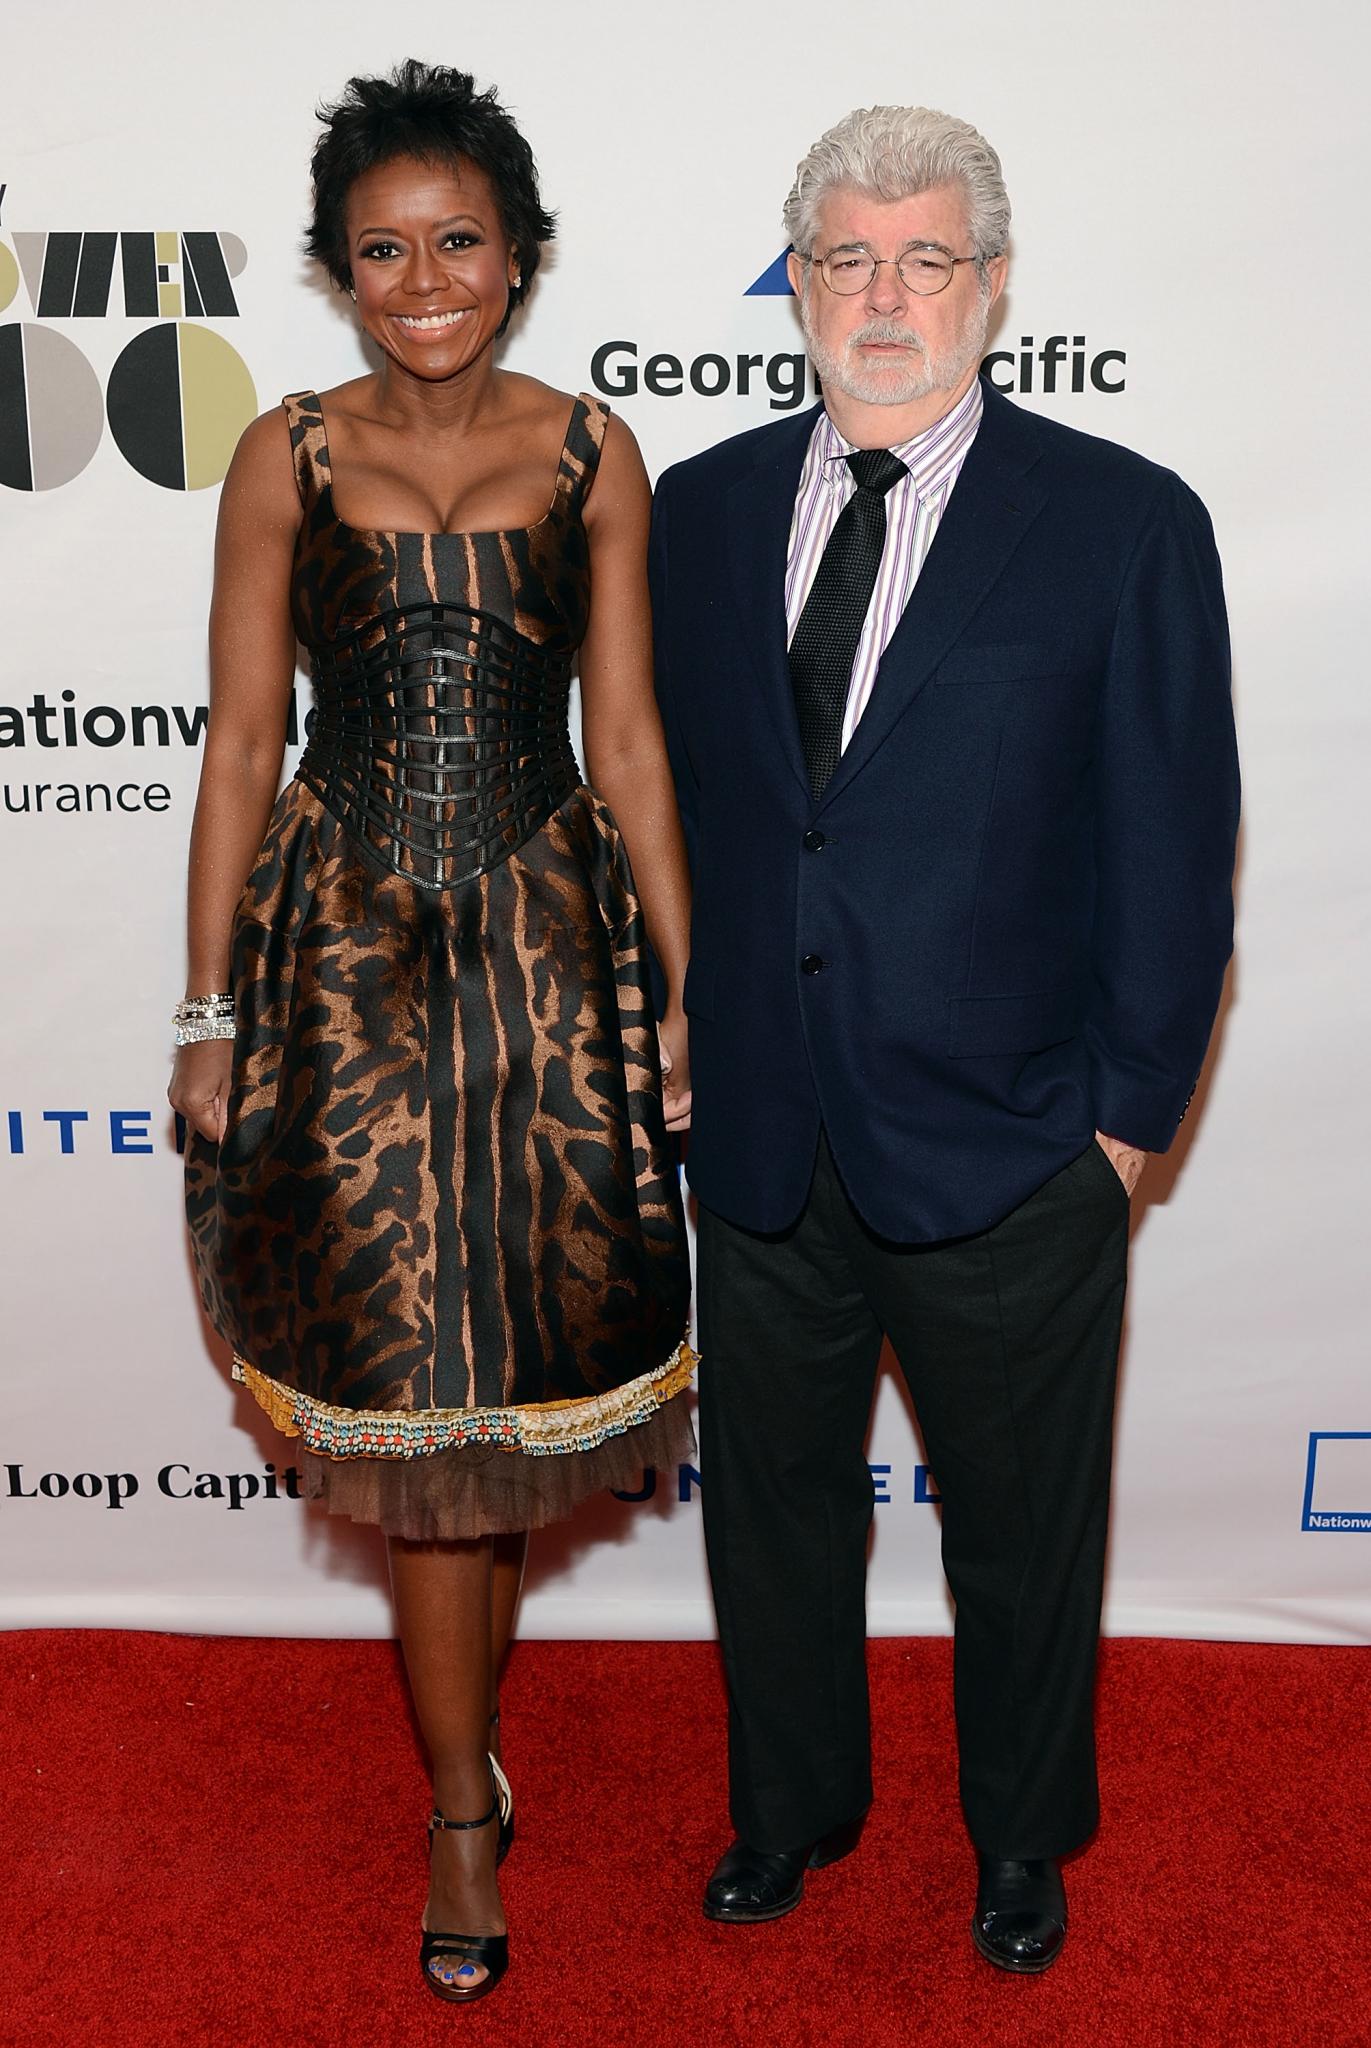 George Lucas Engaged to Mellody Hobson